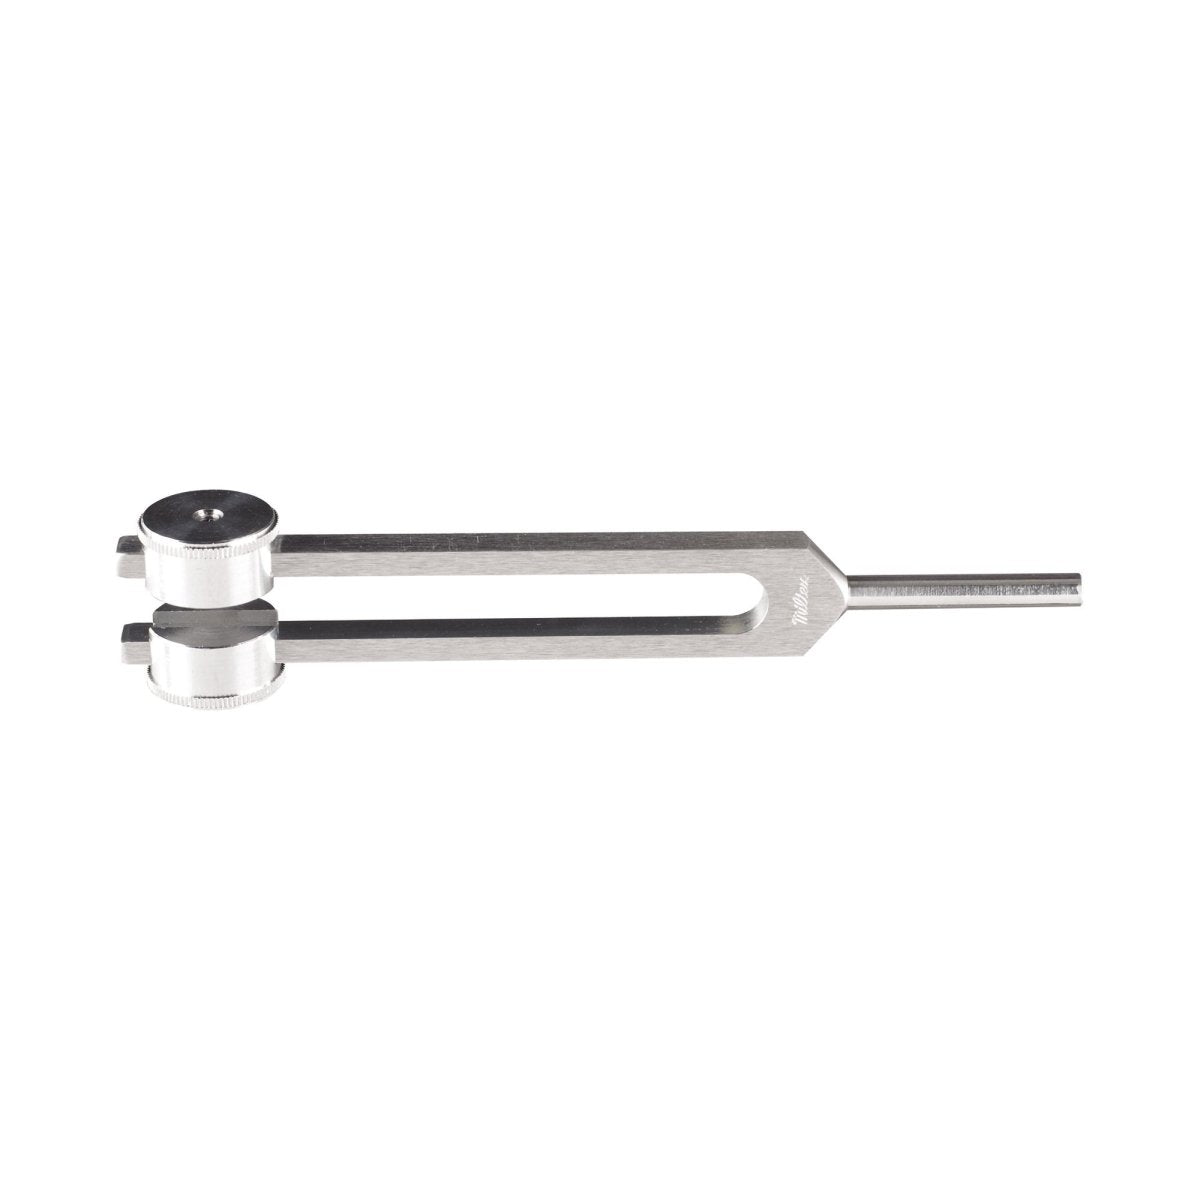 Miltex Tuning Fork with Weight - 157489_EA - 1